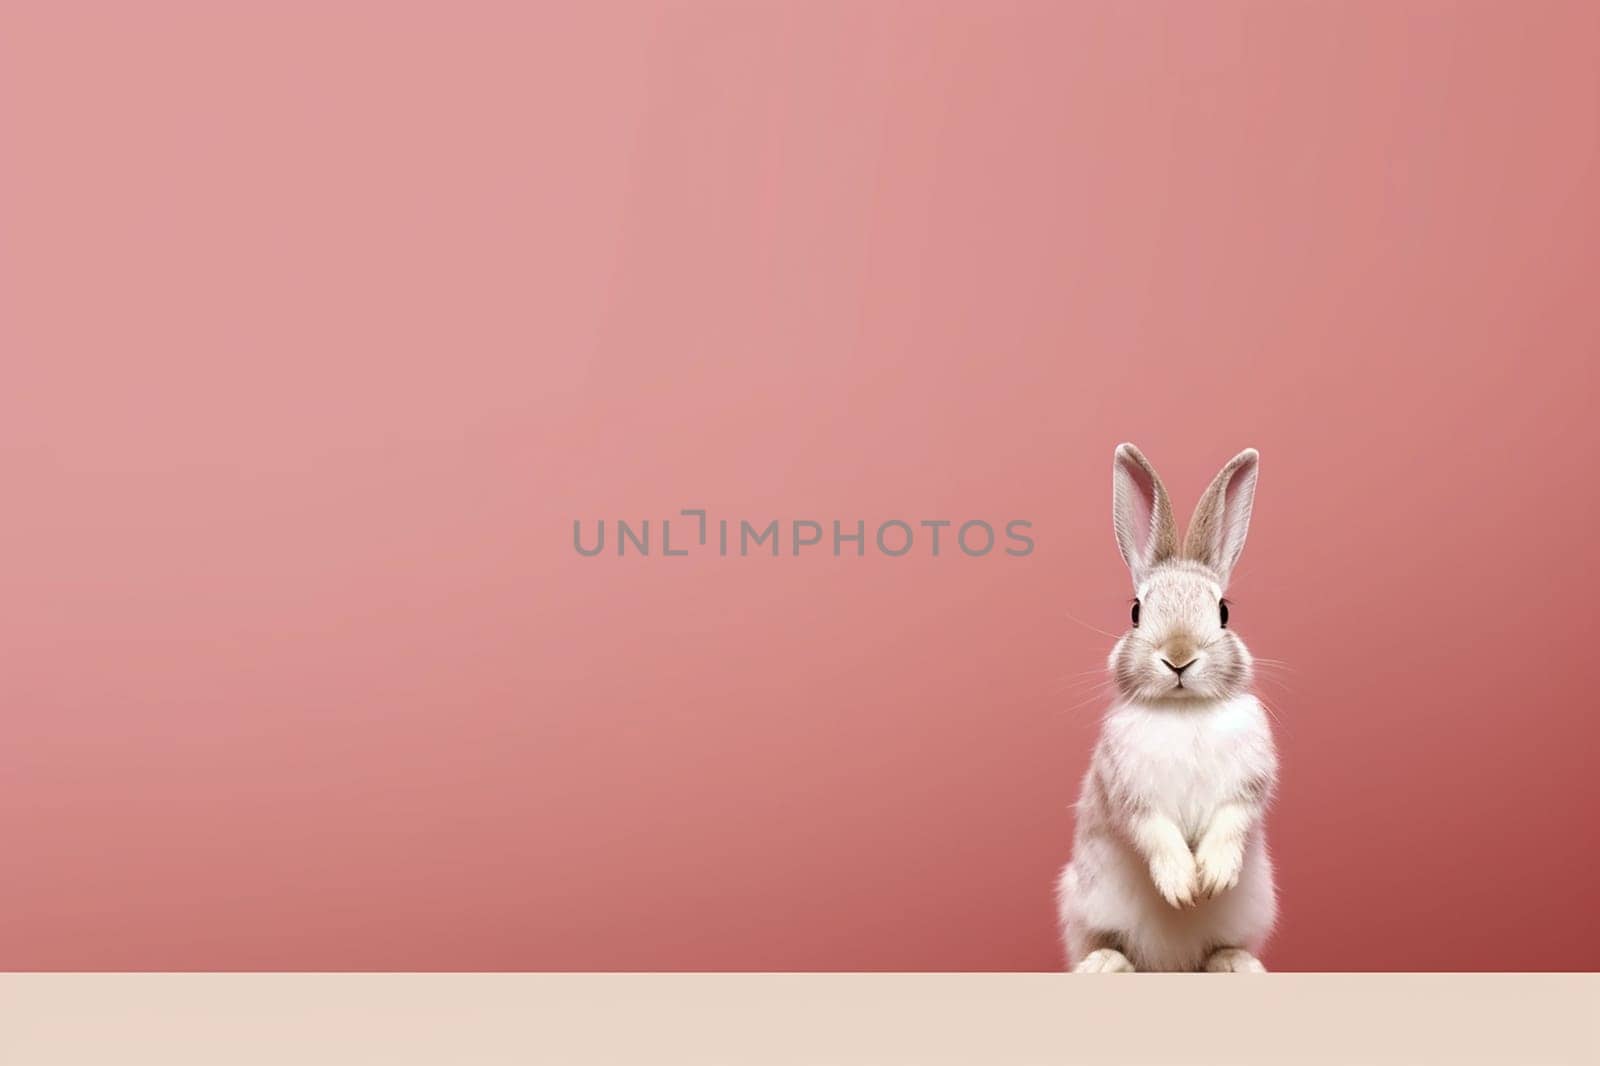 A little cute and adorable small rabbit, baby bunny photo, family pet, neutral pink background by Hype2art